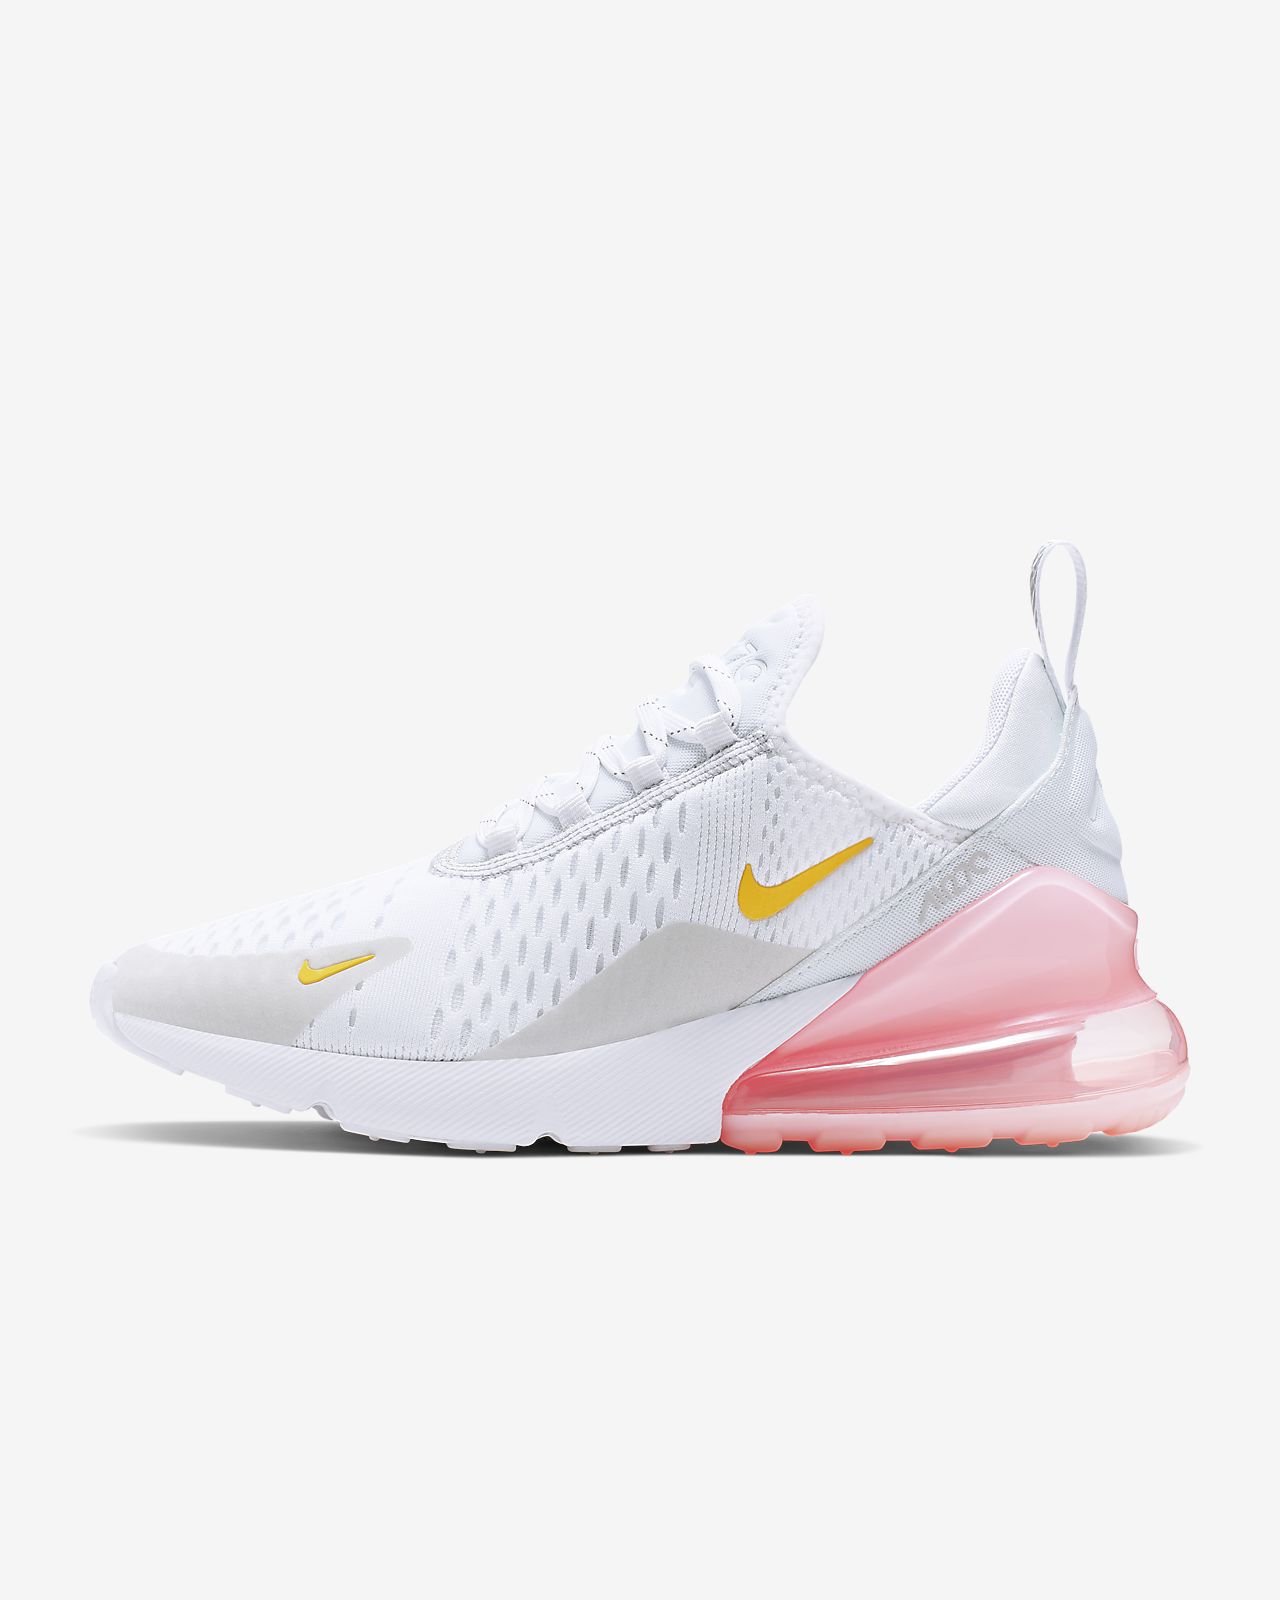 nike air max 270 light pink and white